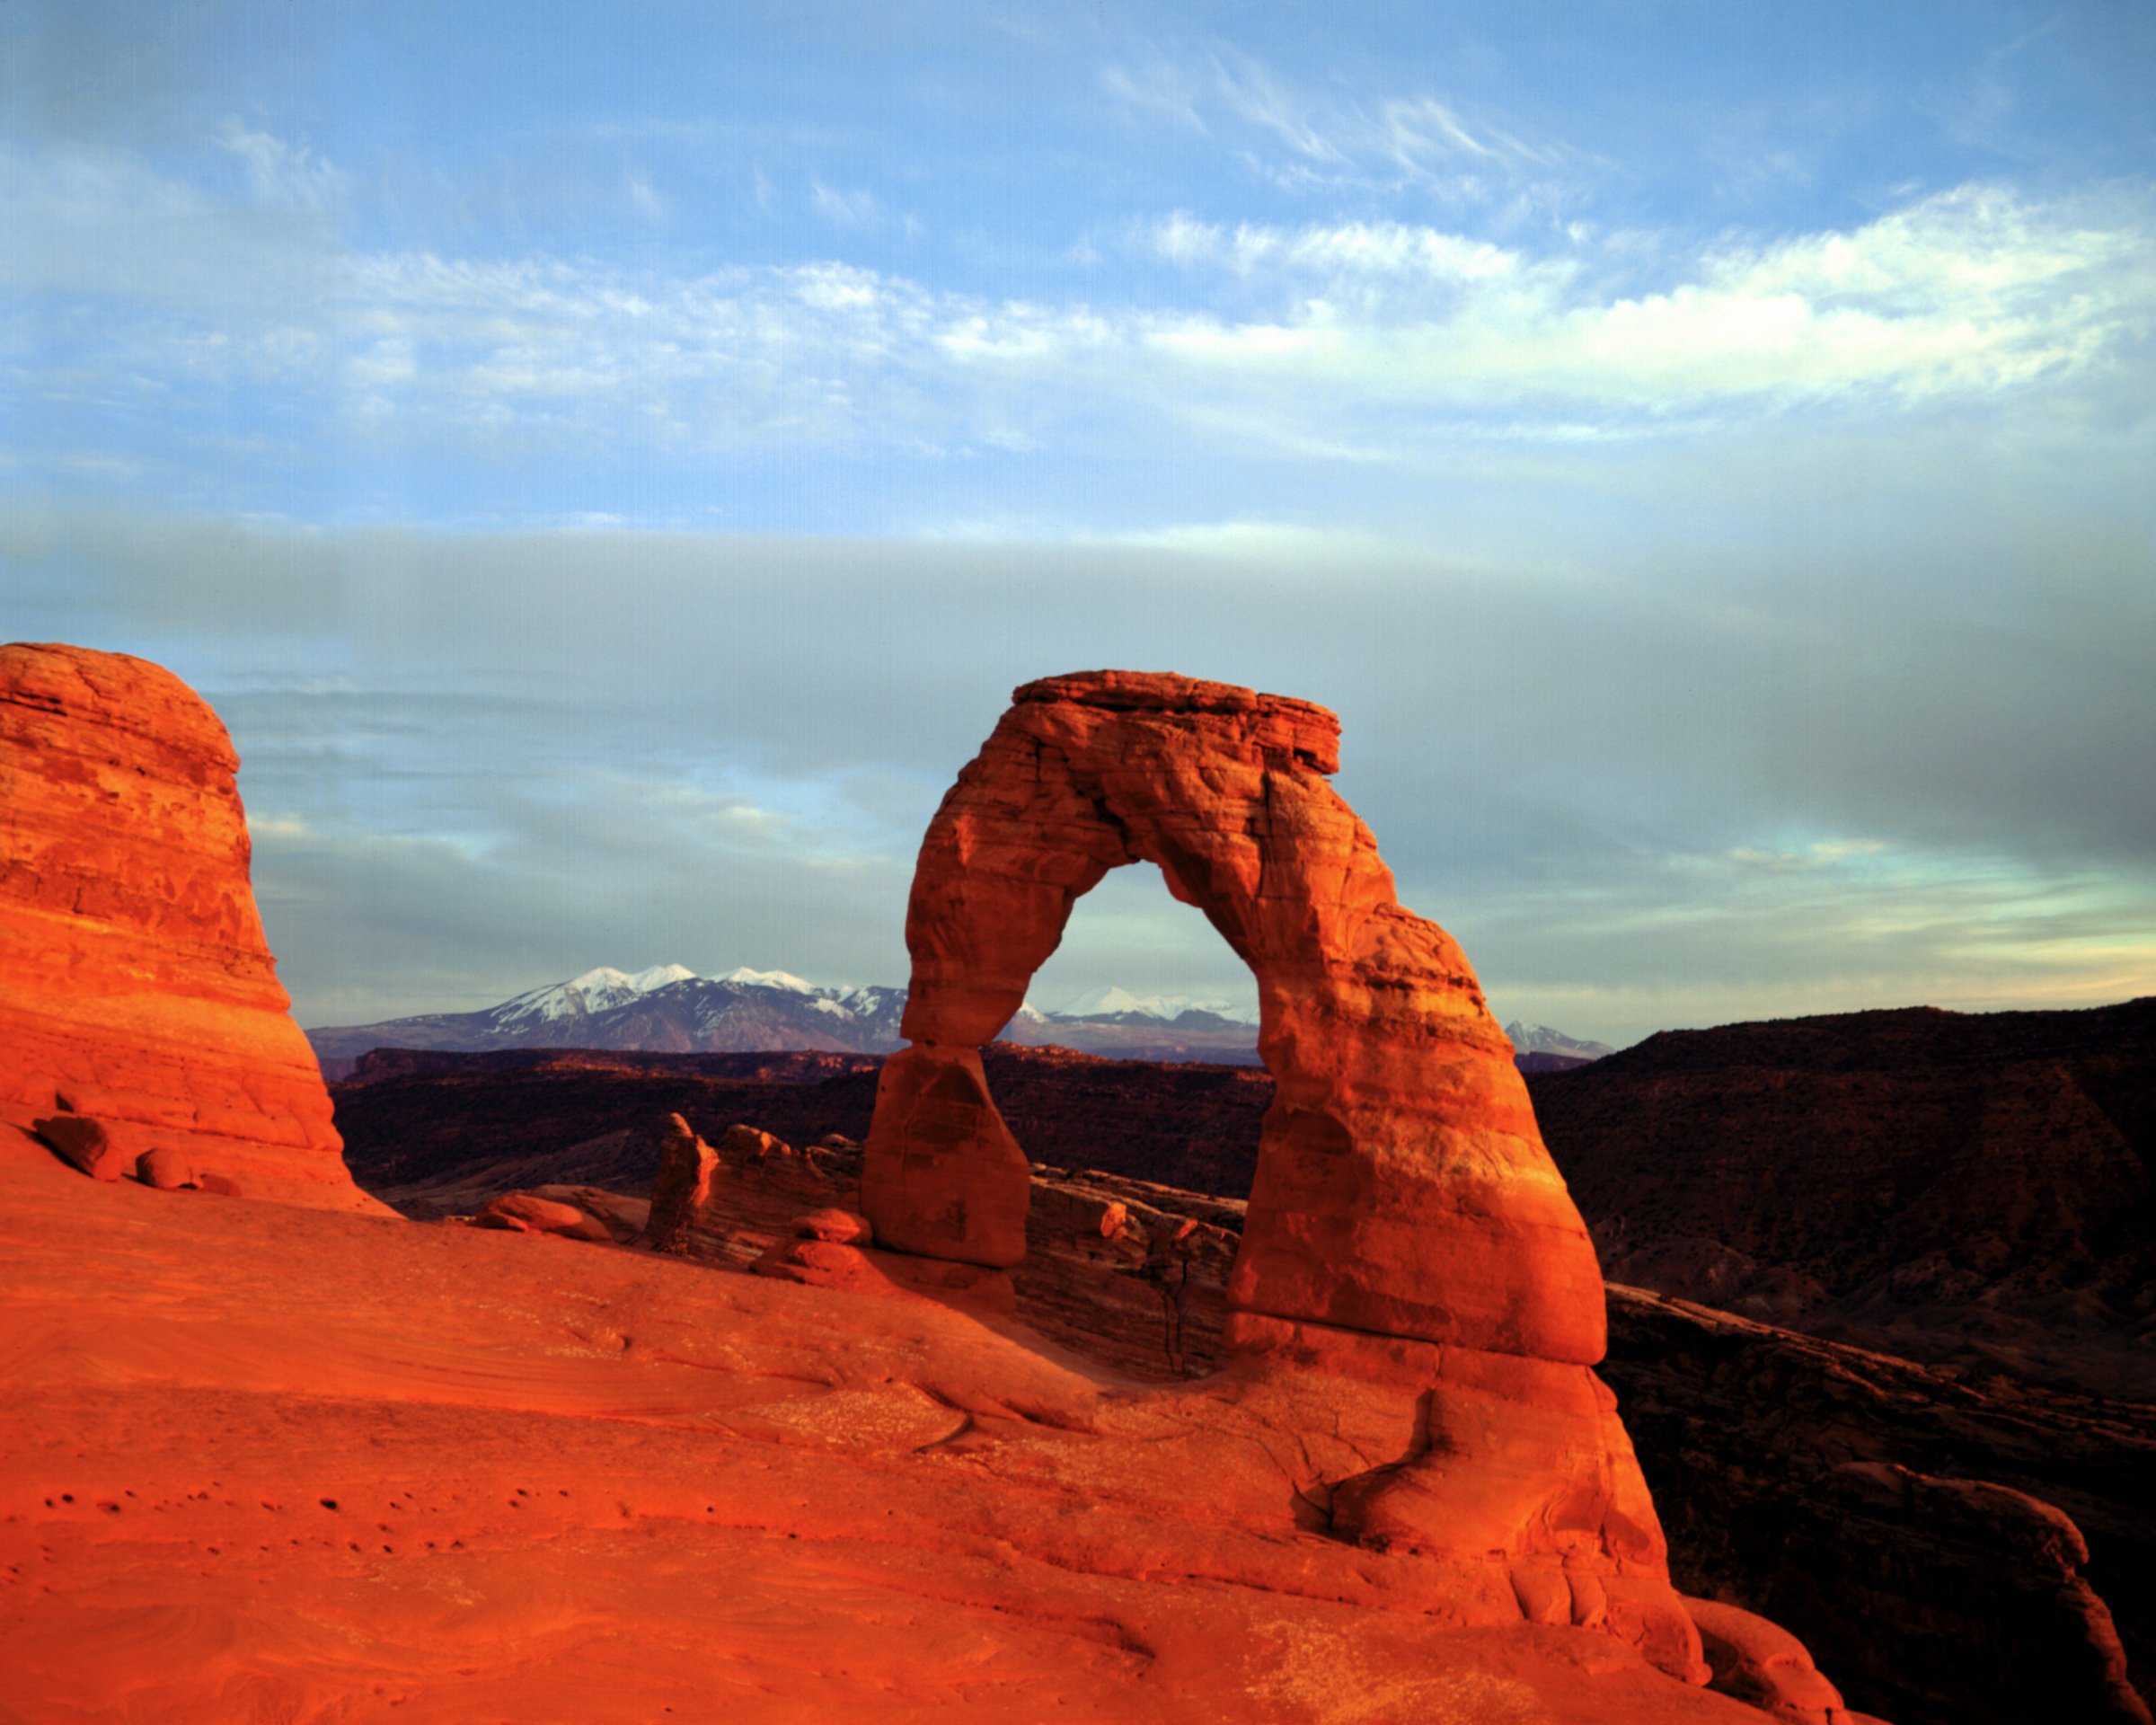 Arches National Park in Utah covers 76,679 acres